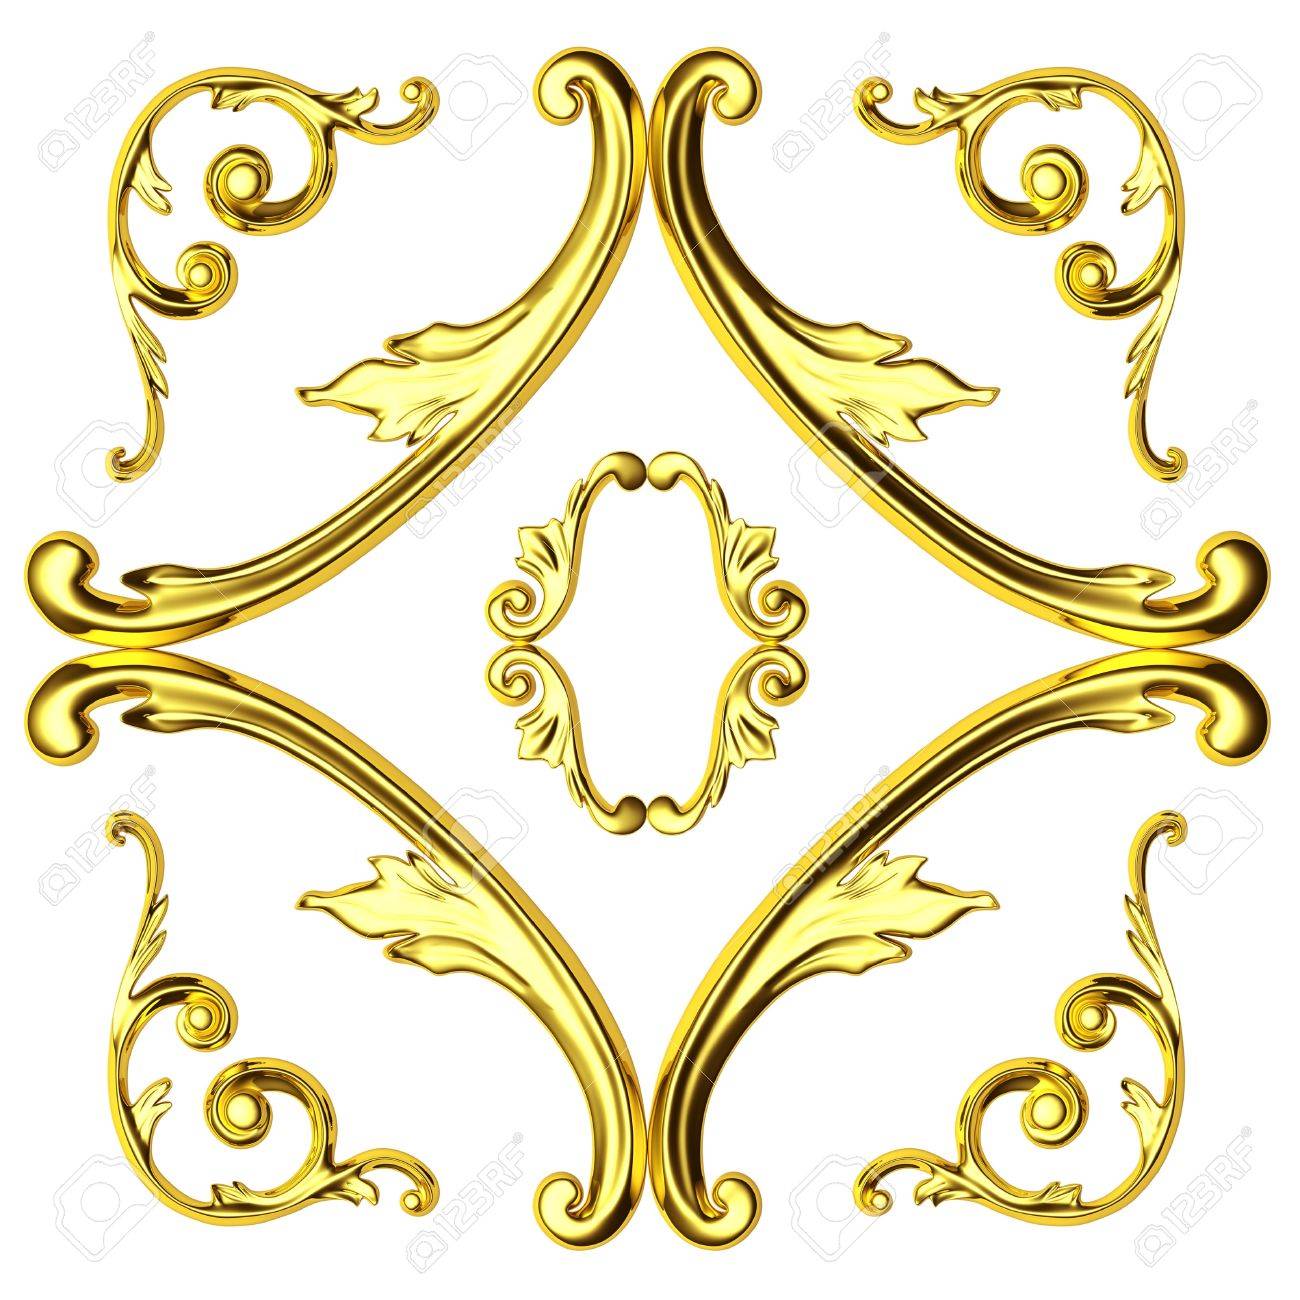 3d Gold Frame The Sculptural Form On A White Background Stock